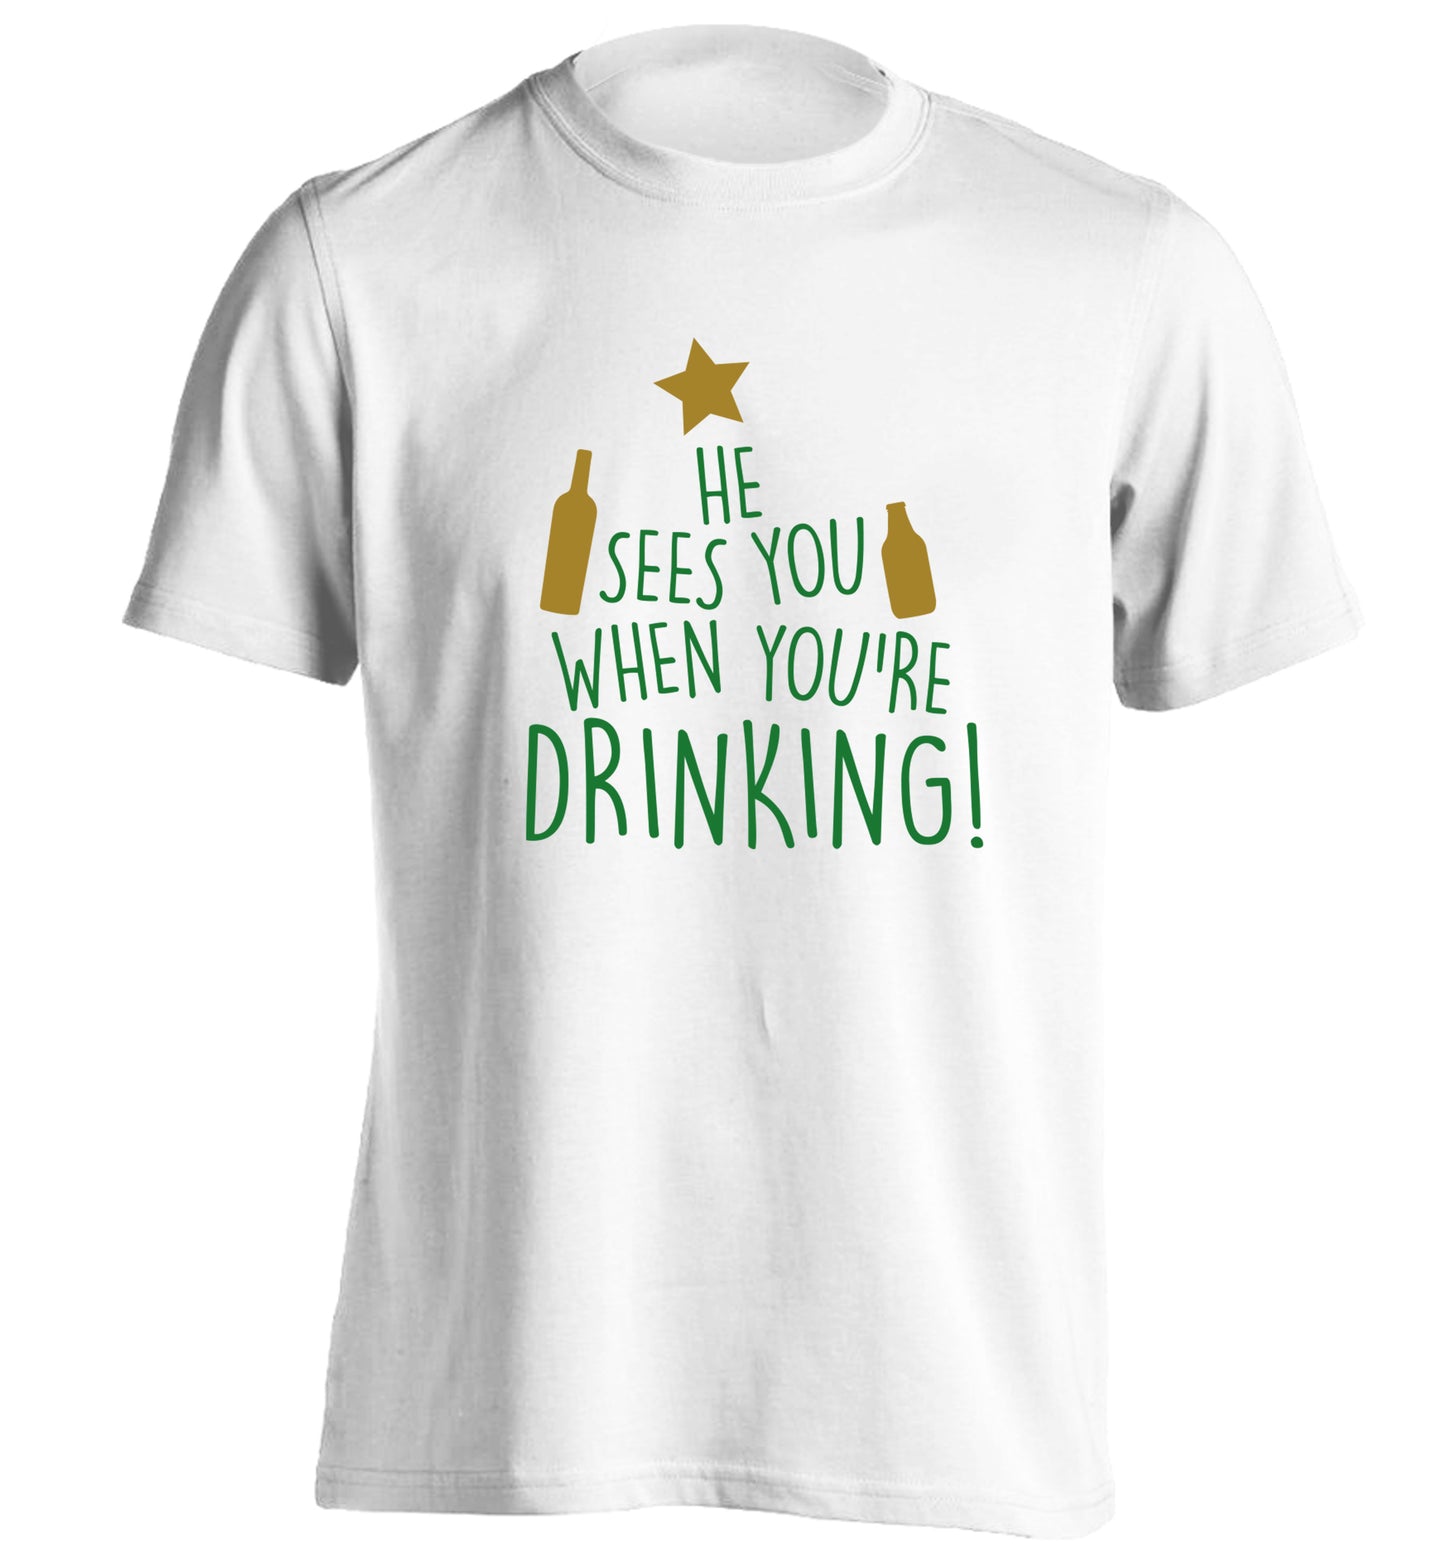 He sees you when you're drinking adults unisex white Tshirt 2XL